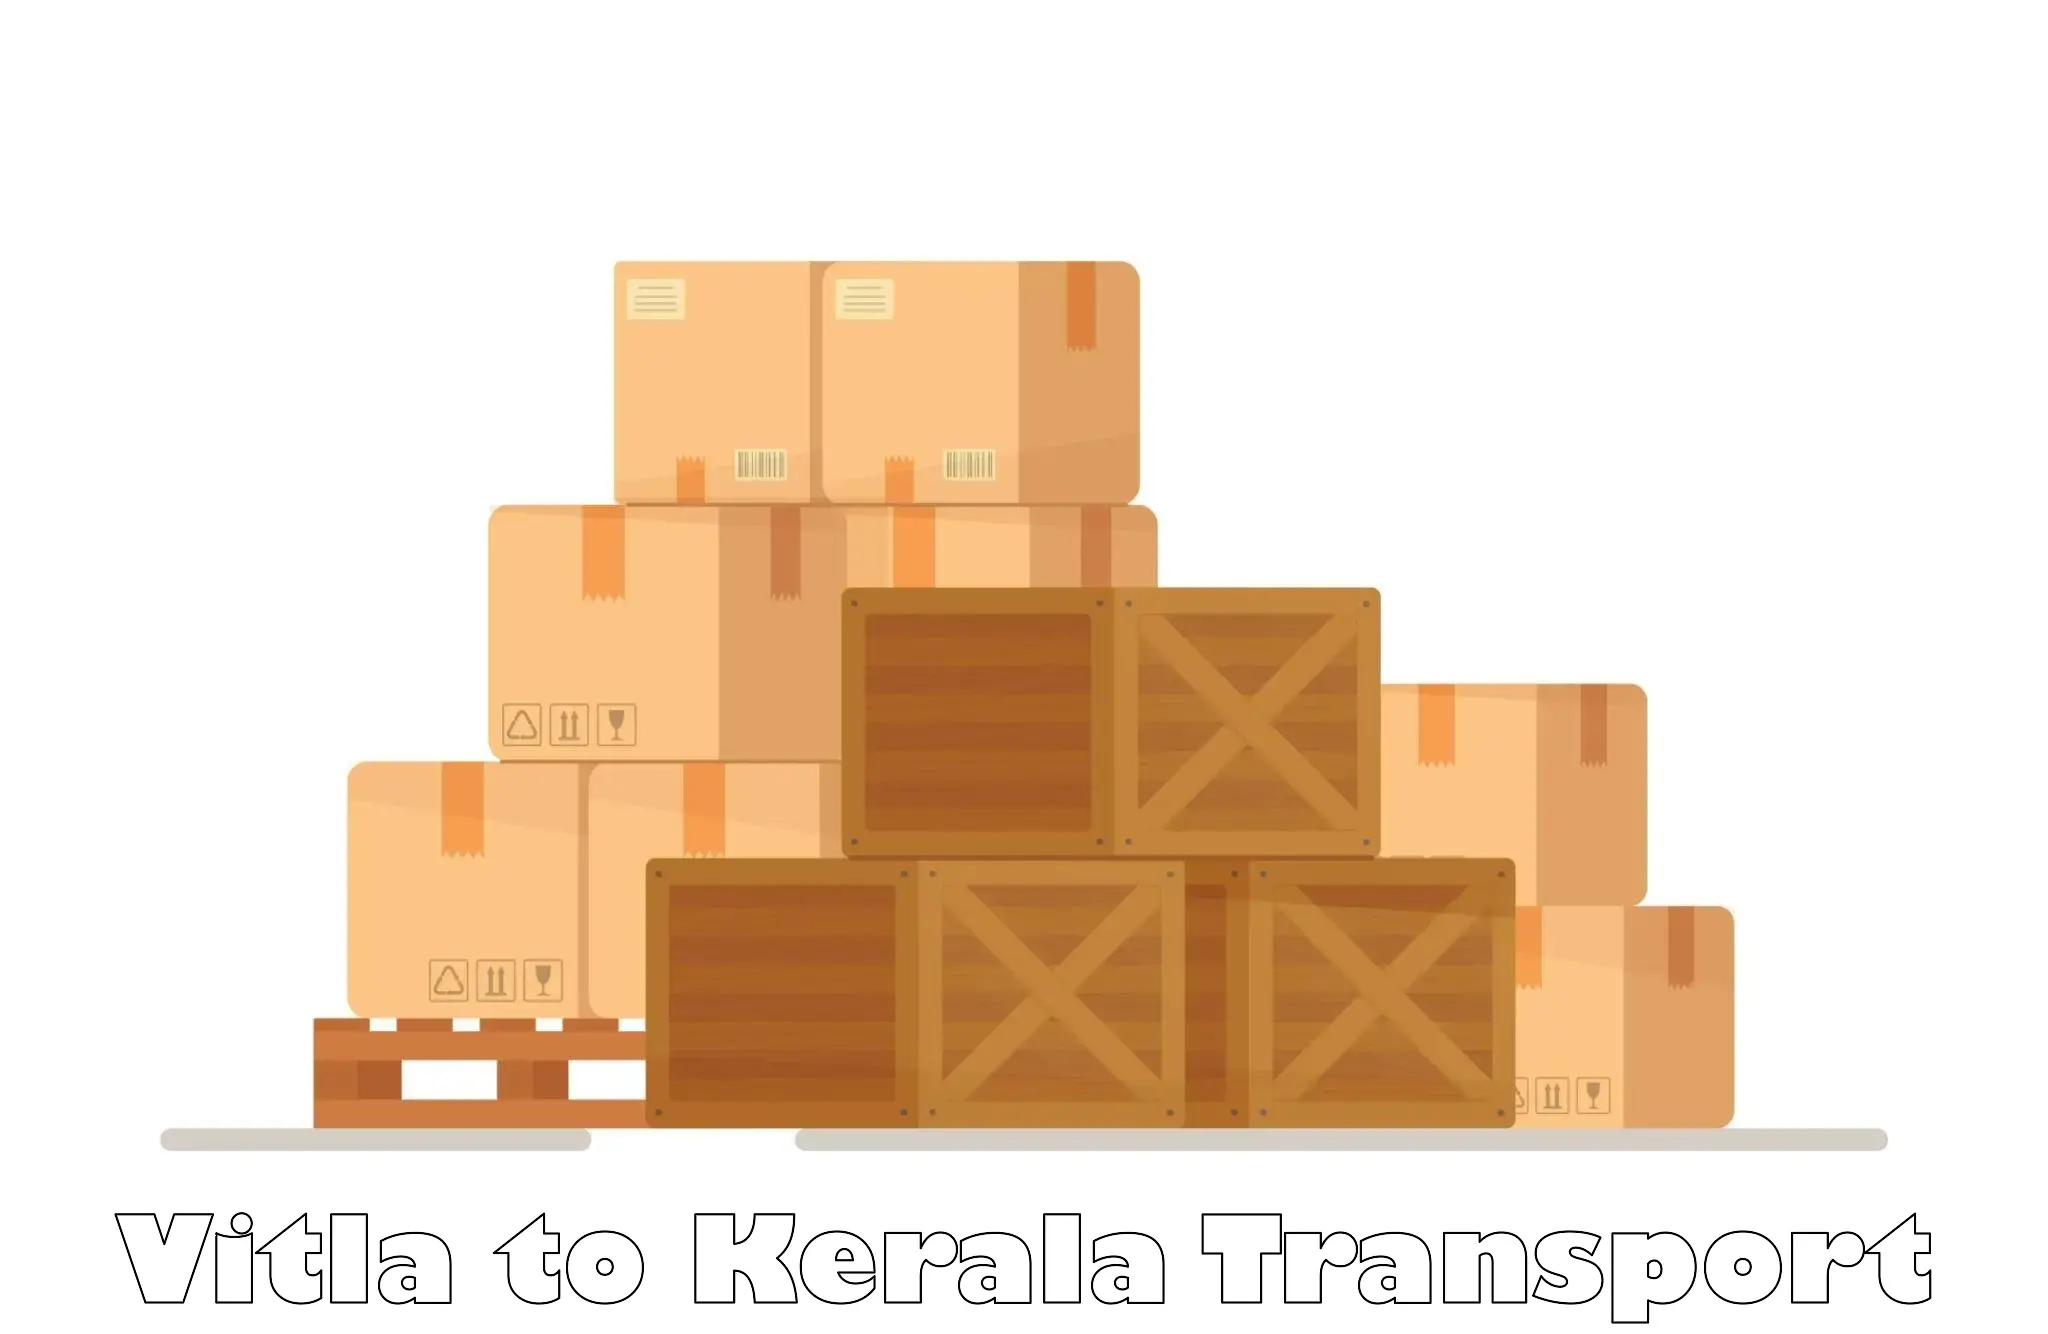 Transport shared services in Vitla to Thrissur